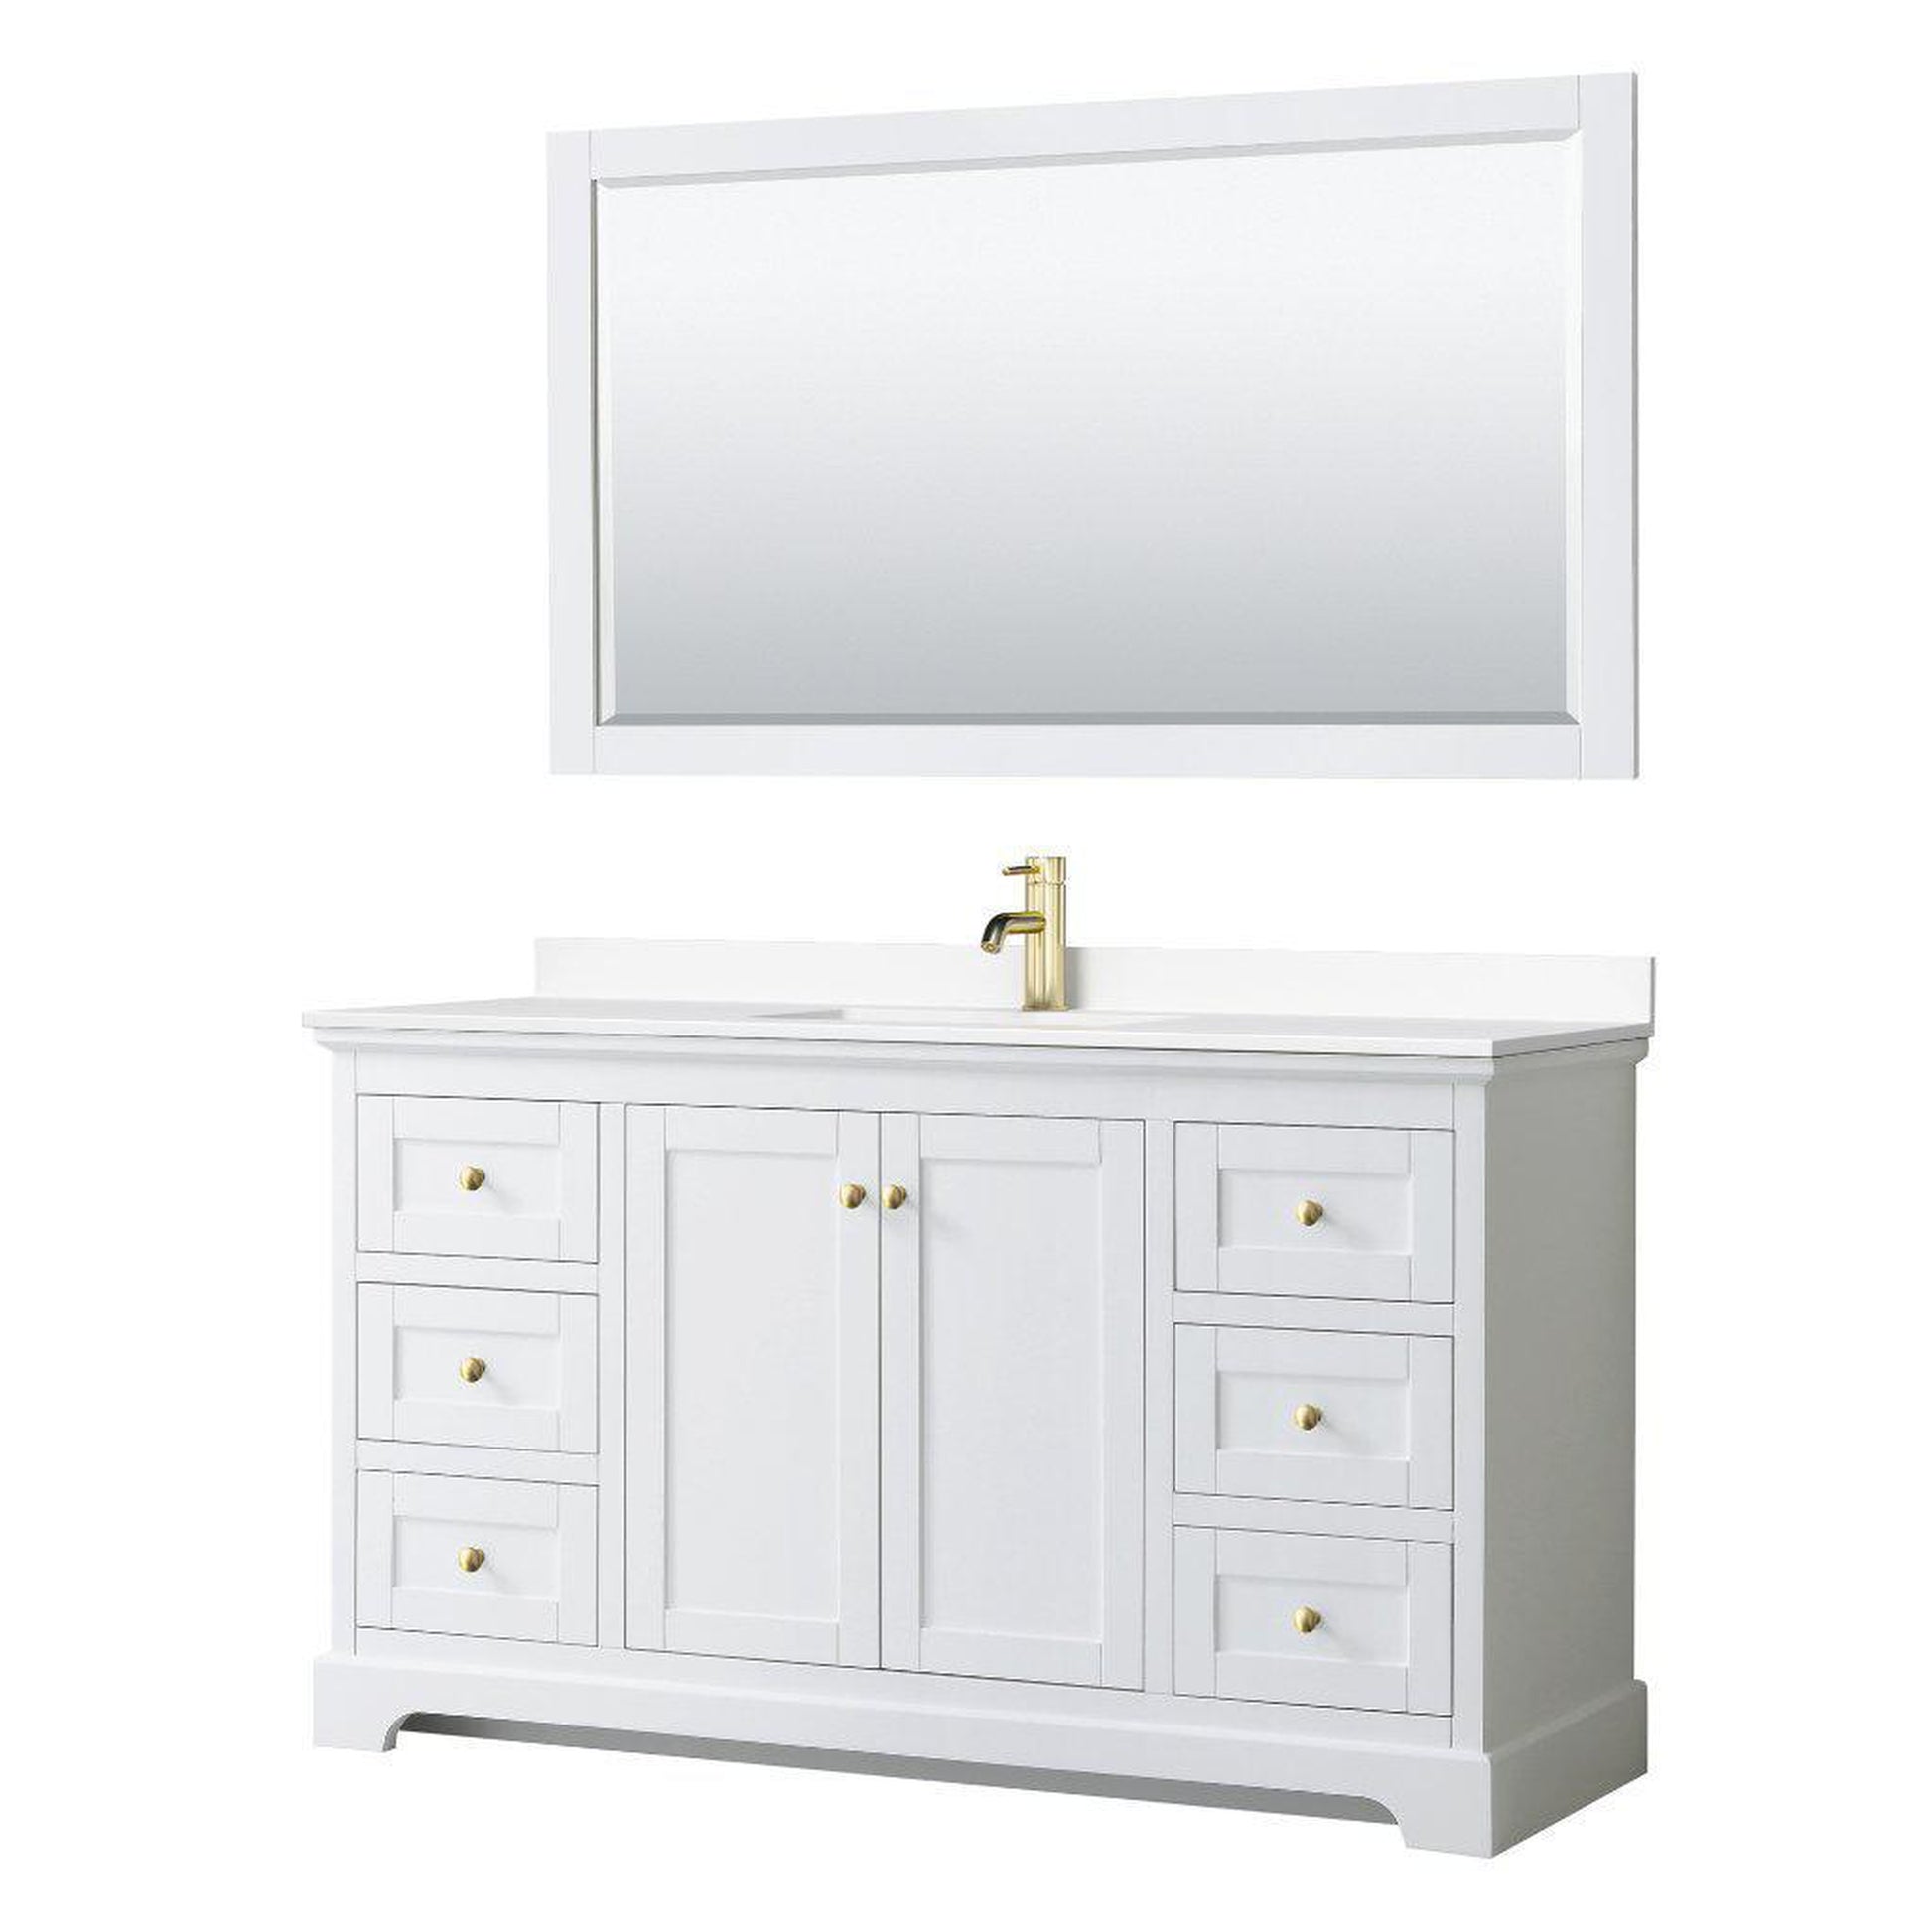 Wyndham Collection Avery 60" White Single Bathroom Vanity Set, White Cultured Marble Countertop With 1-Hole Faucet, Square Sink, 58" Mirror, Gold Trims